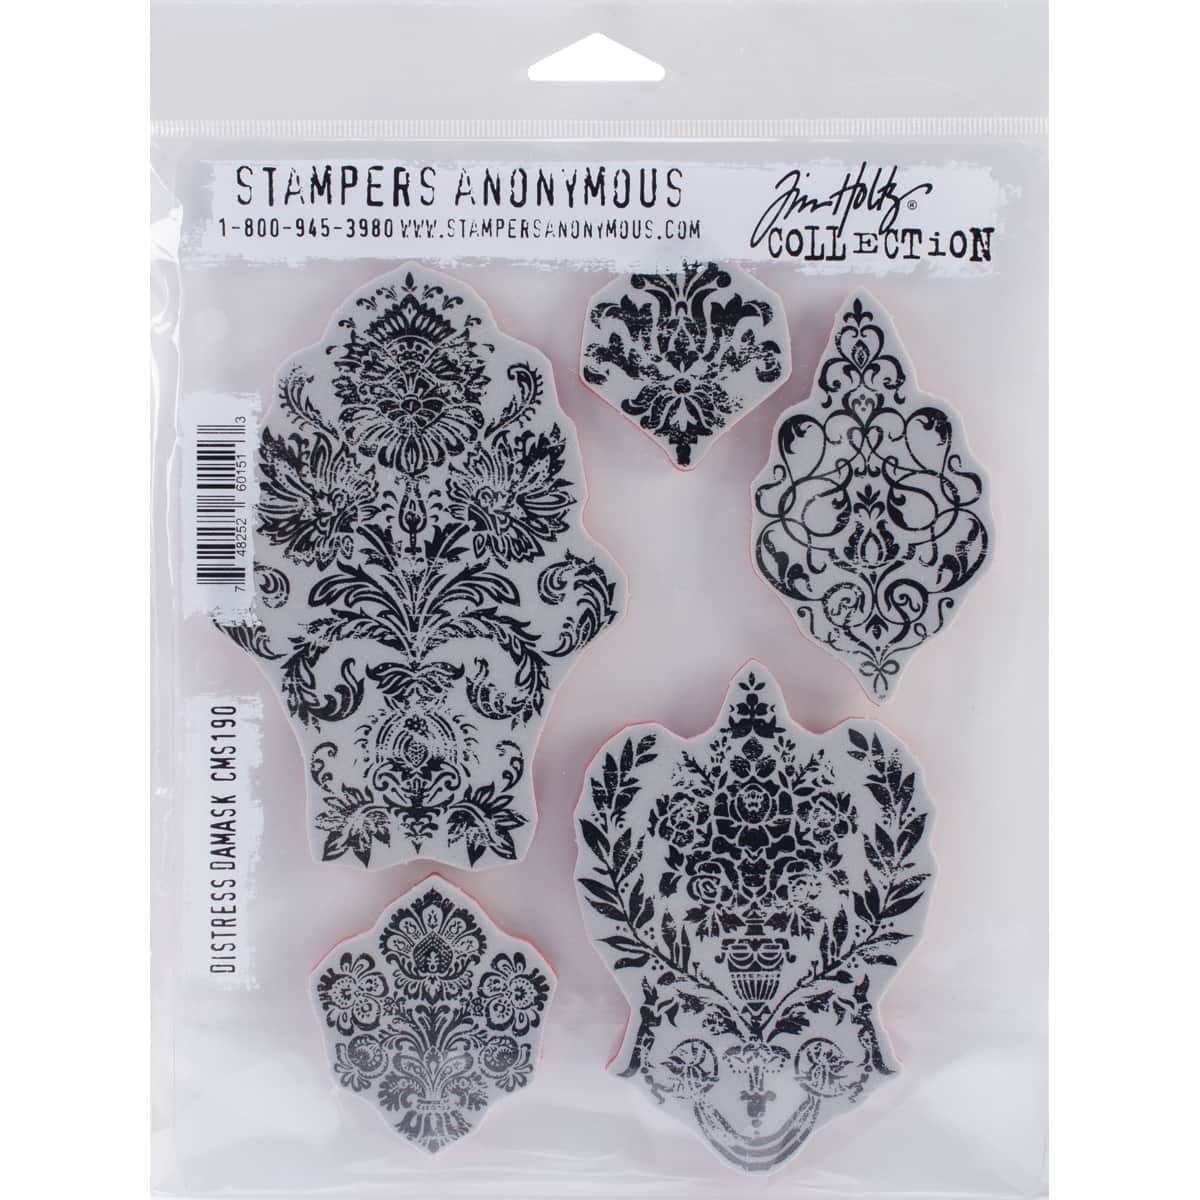 Tim Holtz Stamps Stampers Anonymous Artful Silhouettes Rubber Stamp